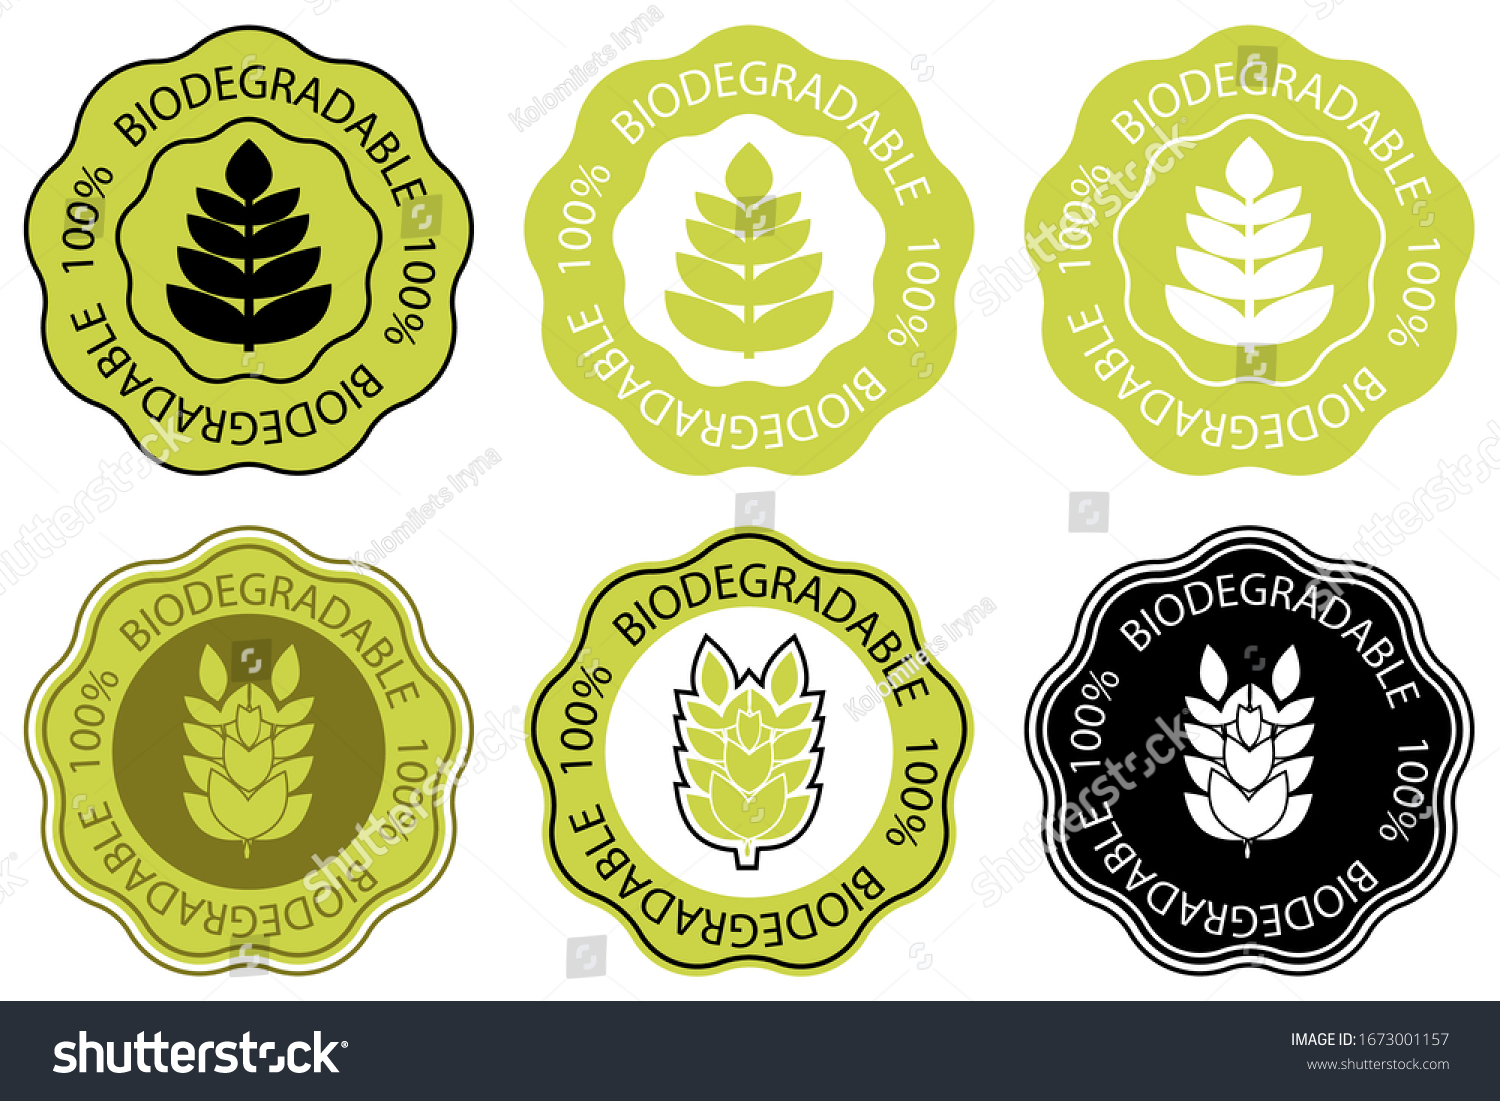 SVG of Biodegradable icon. One hundred percent biodegradable label. Set of round stamps with lettering 